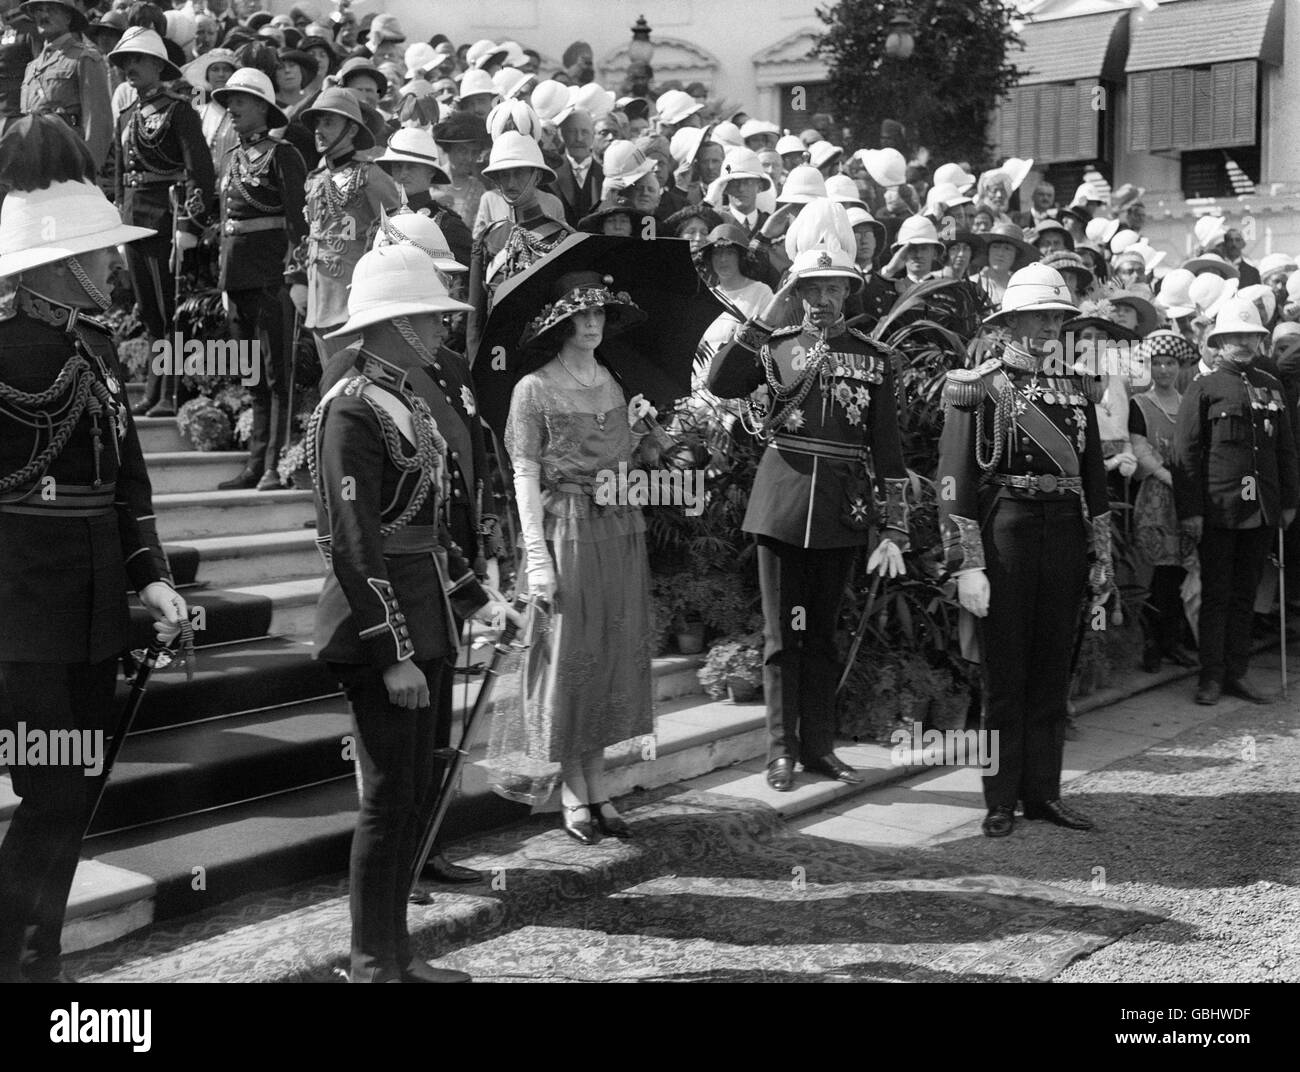 The Prince of Wales arriving at Government House, Calcutta. Left to right, Lord Cromer, The Prince of Wales, Countess of Ronaldshay, Lord Rawlinson, and Admiral Sir Lionel Halsey. Stock Photo